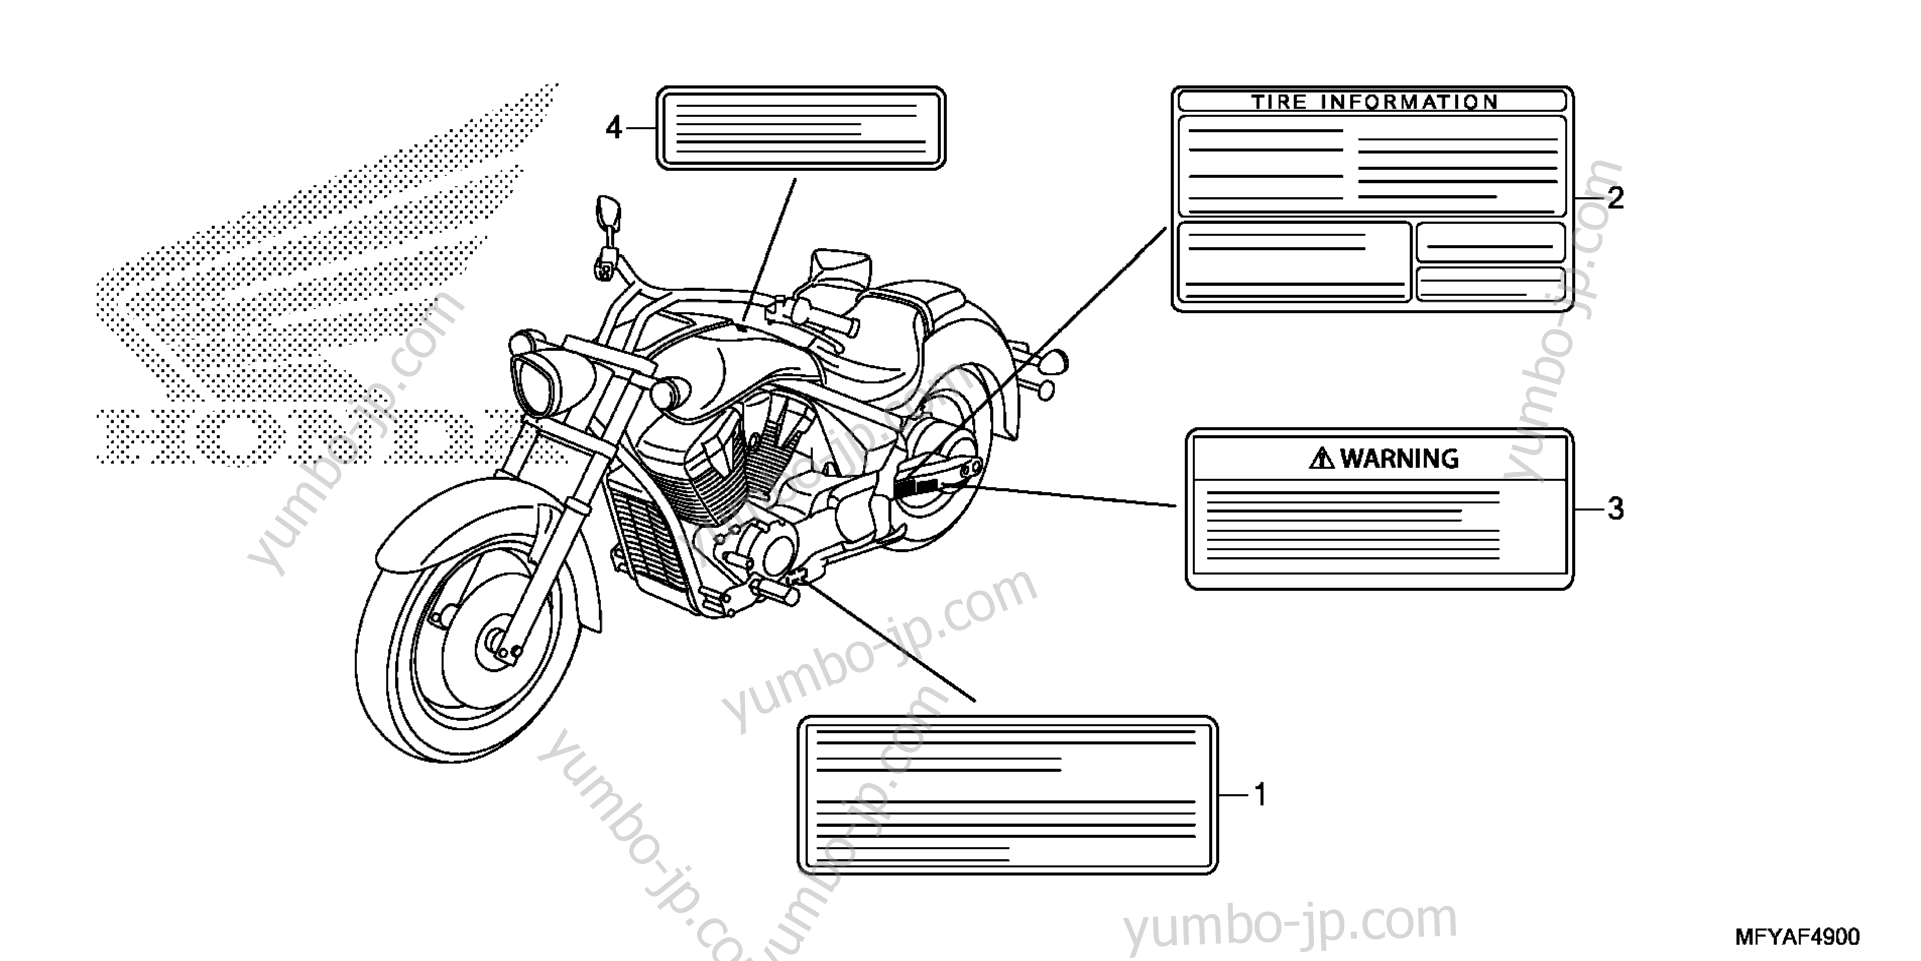 CAUTION LABEL for motorcycles HONDA VT1300CR A 2012 year